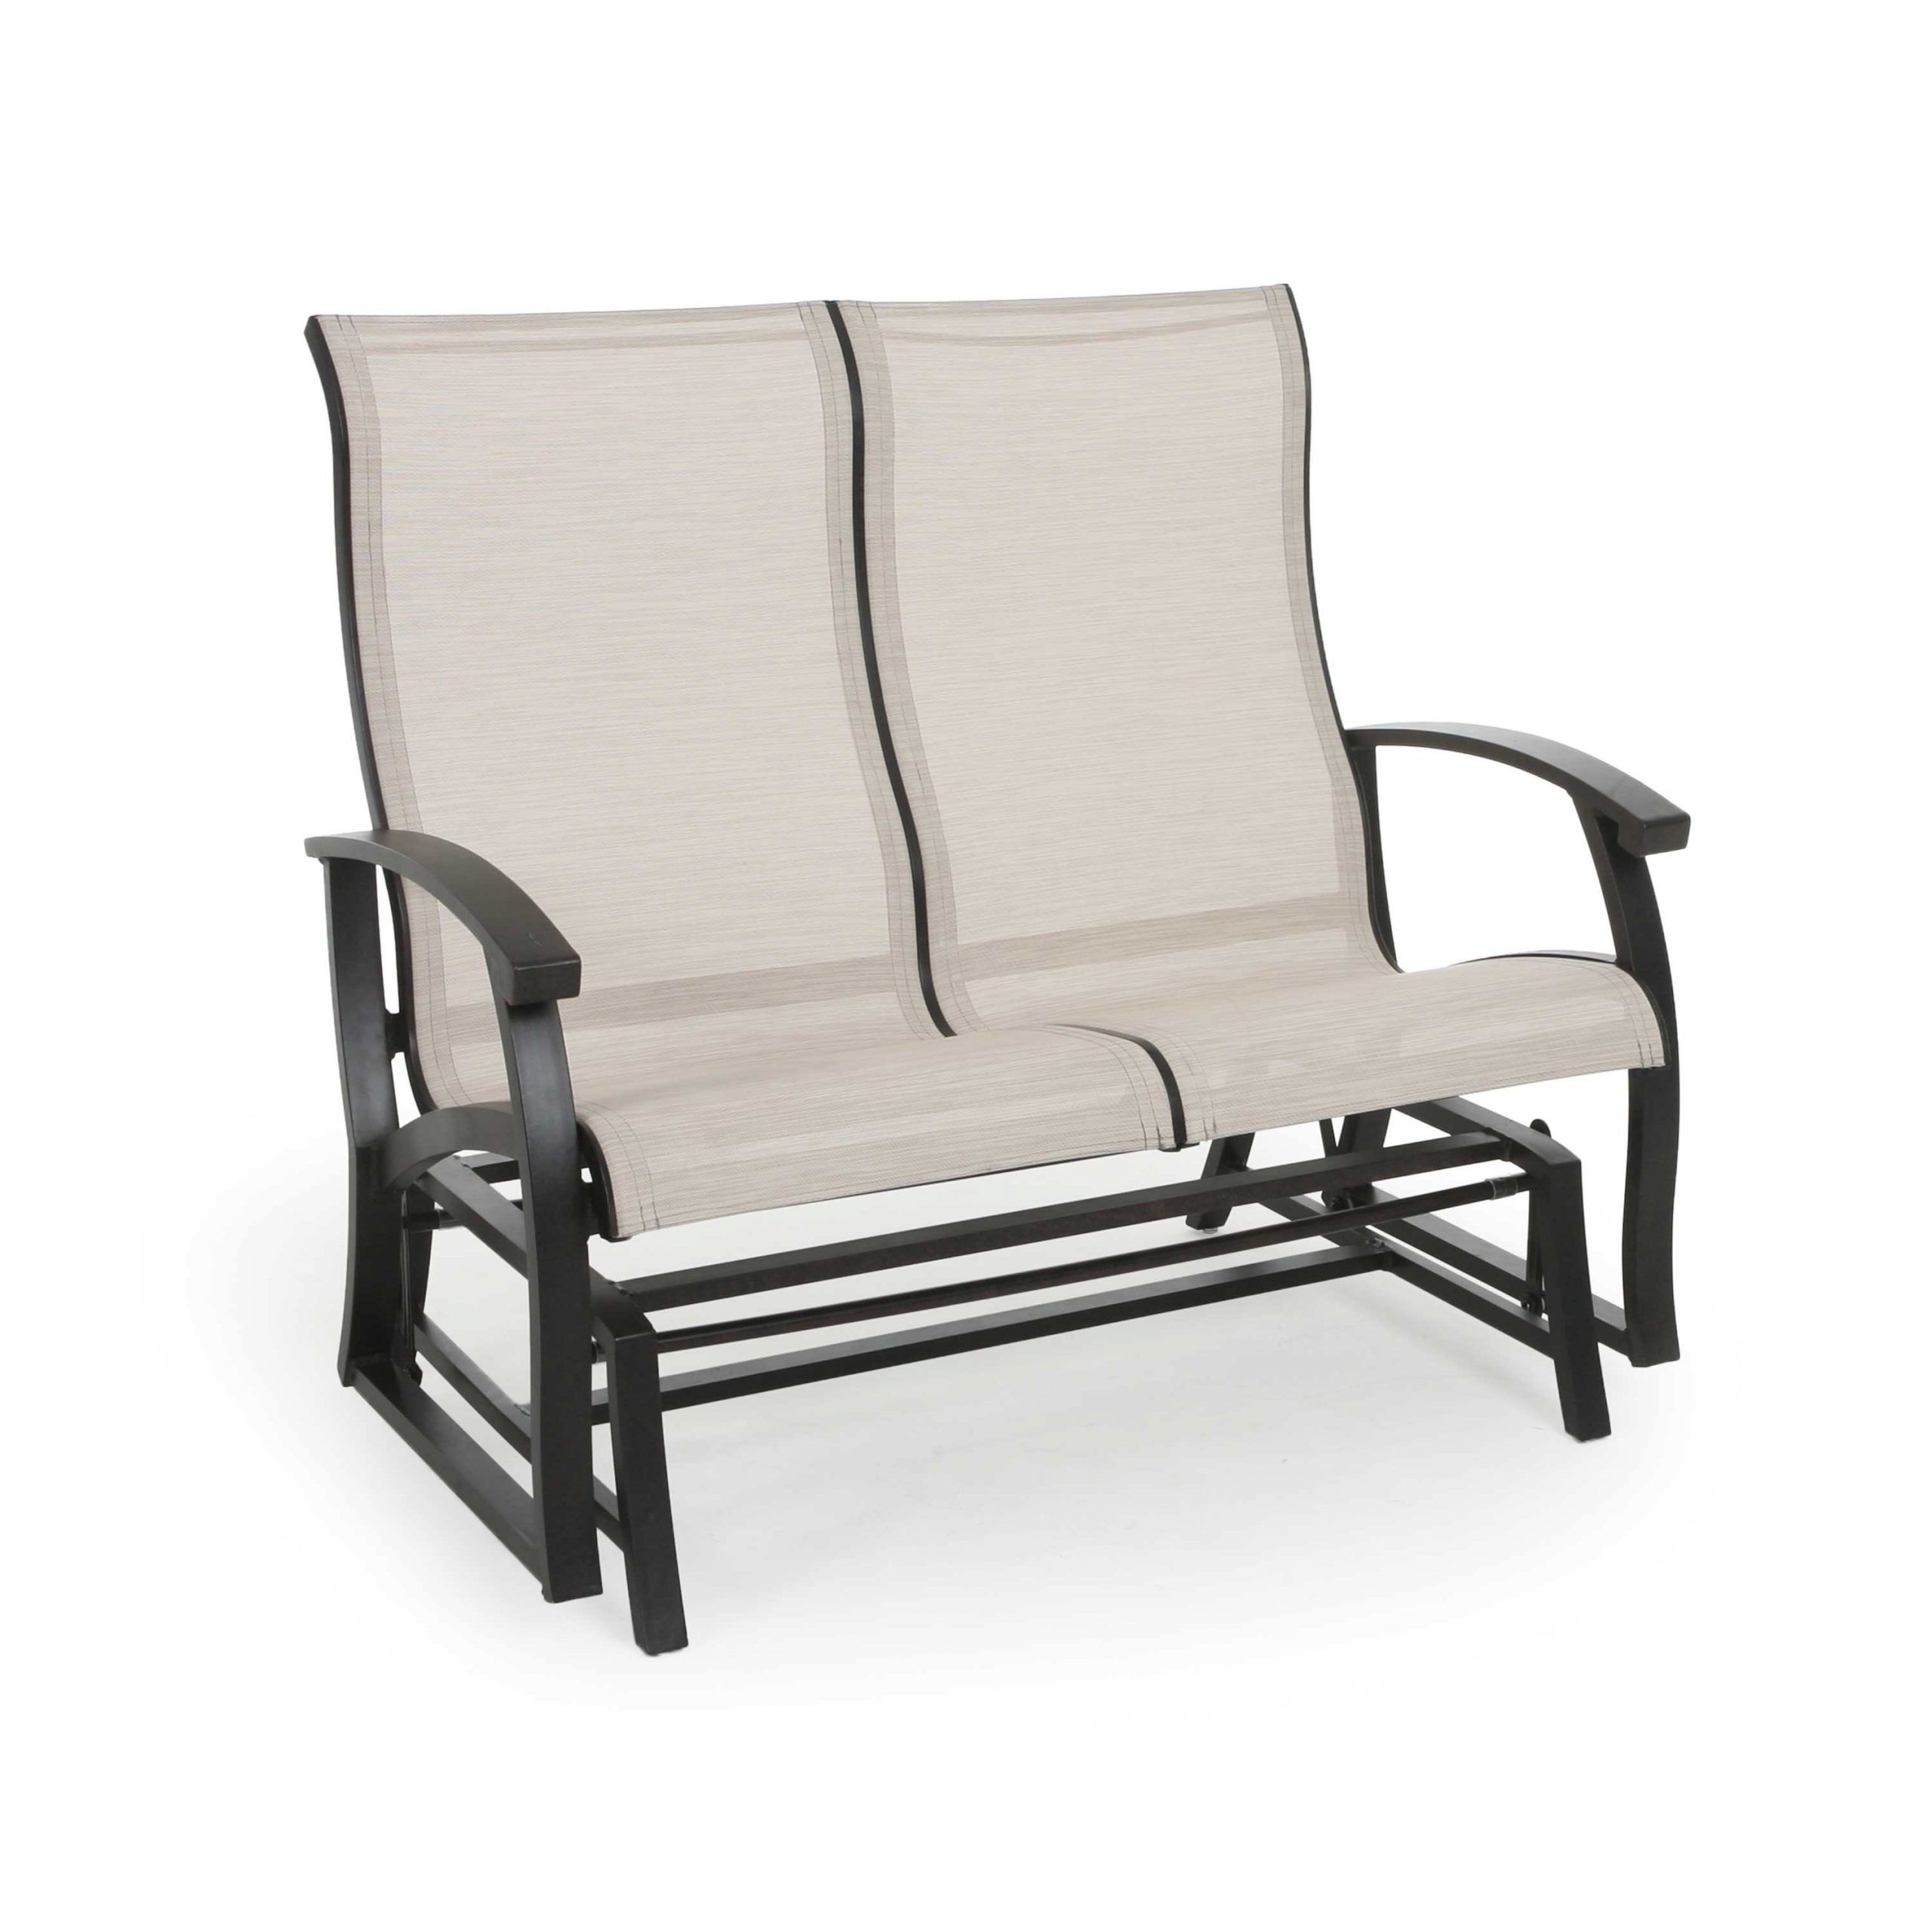 Most Recently Released Mallin Georgetown Double Sling Glider Outdoor Furniture With Regard To Sling Double Glider Benches (View 13 of 30)